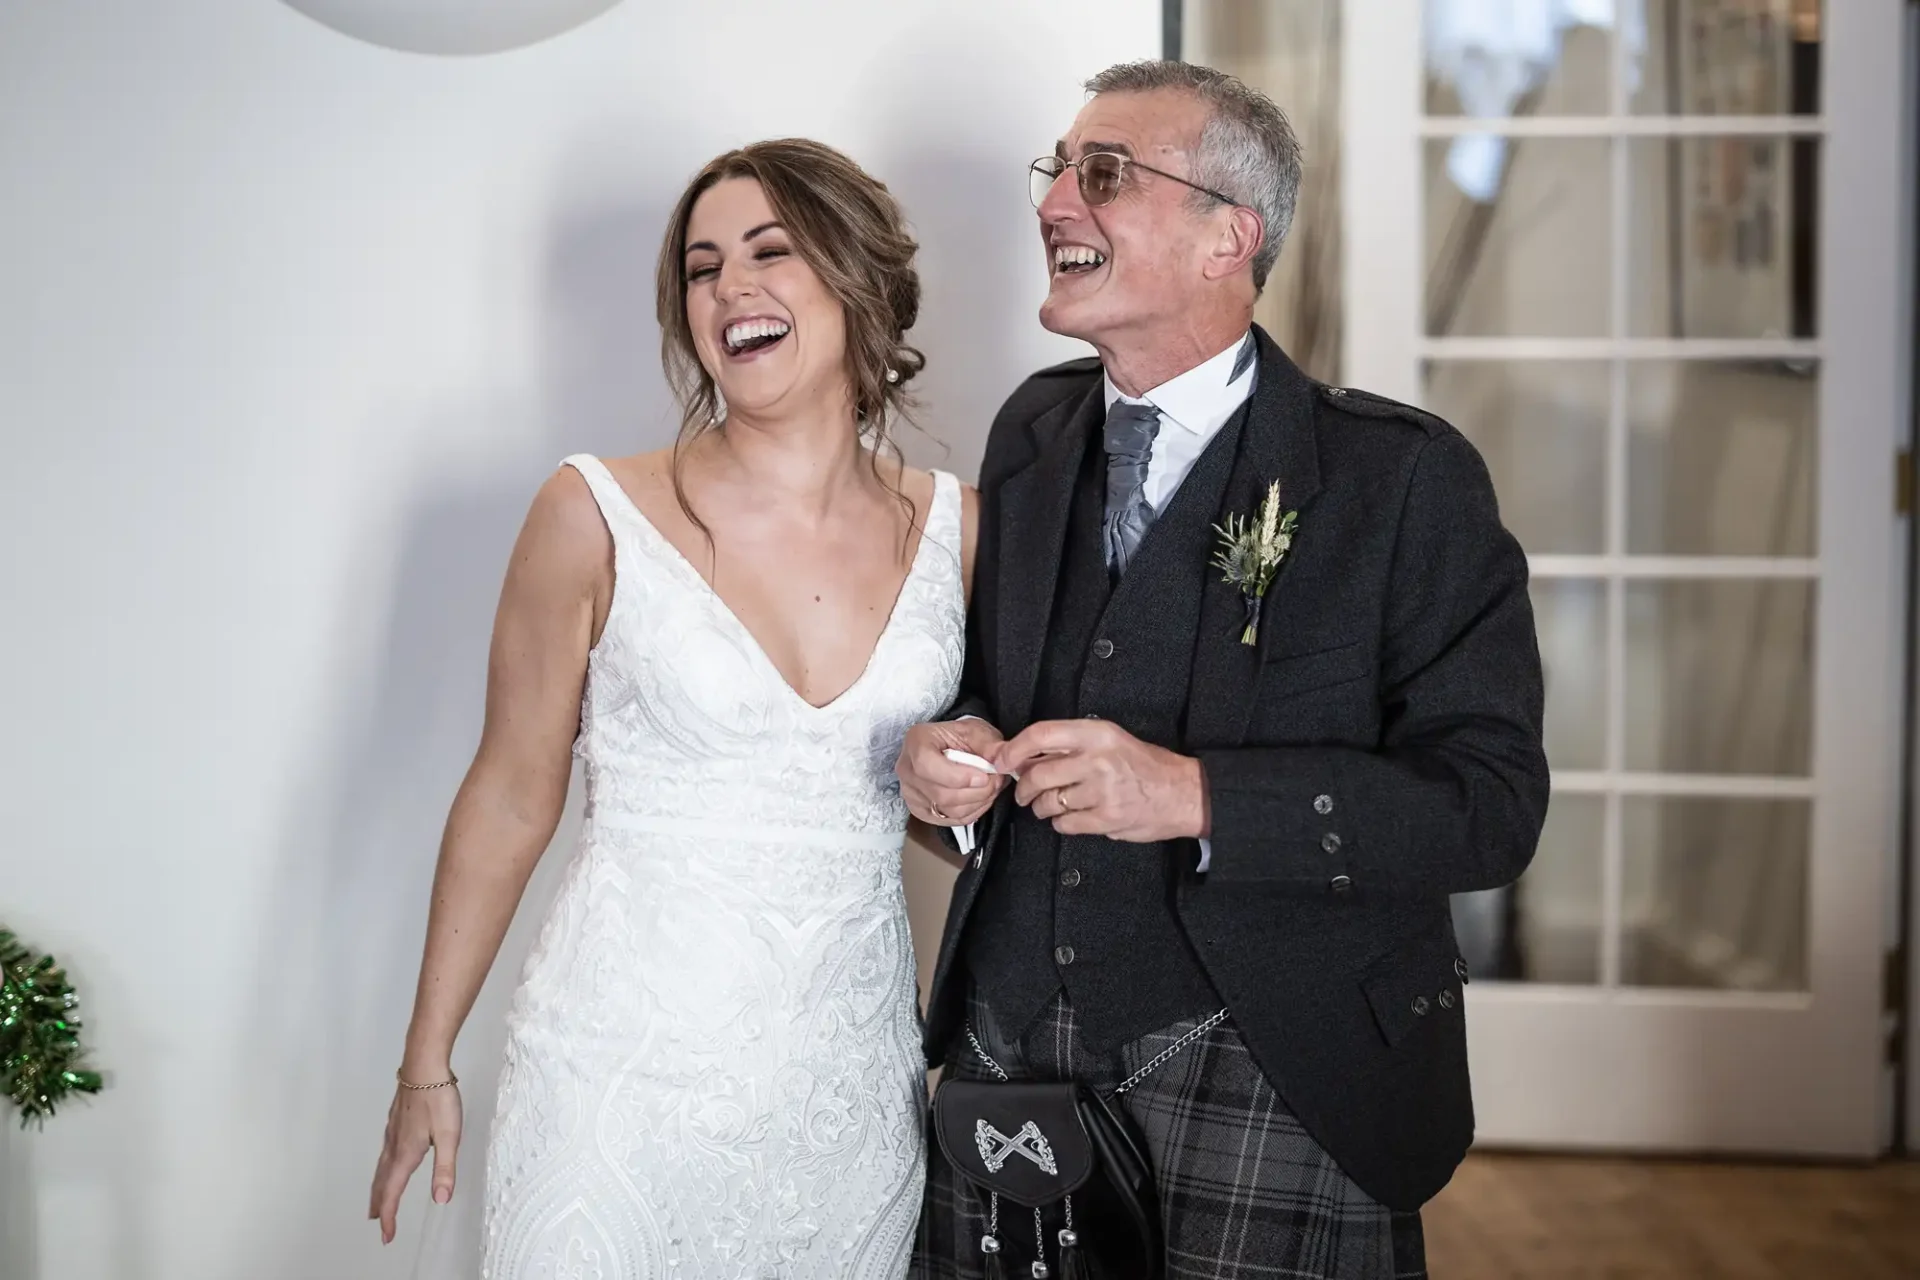 A bride in a white dress laughs joyfully next to an older man in a kilt and tweed jacket, both holding hands at a wedding.